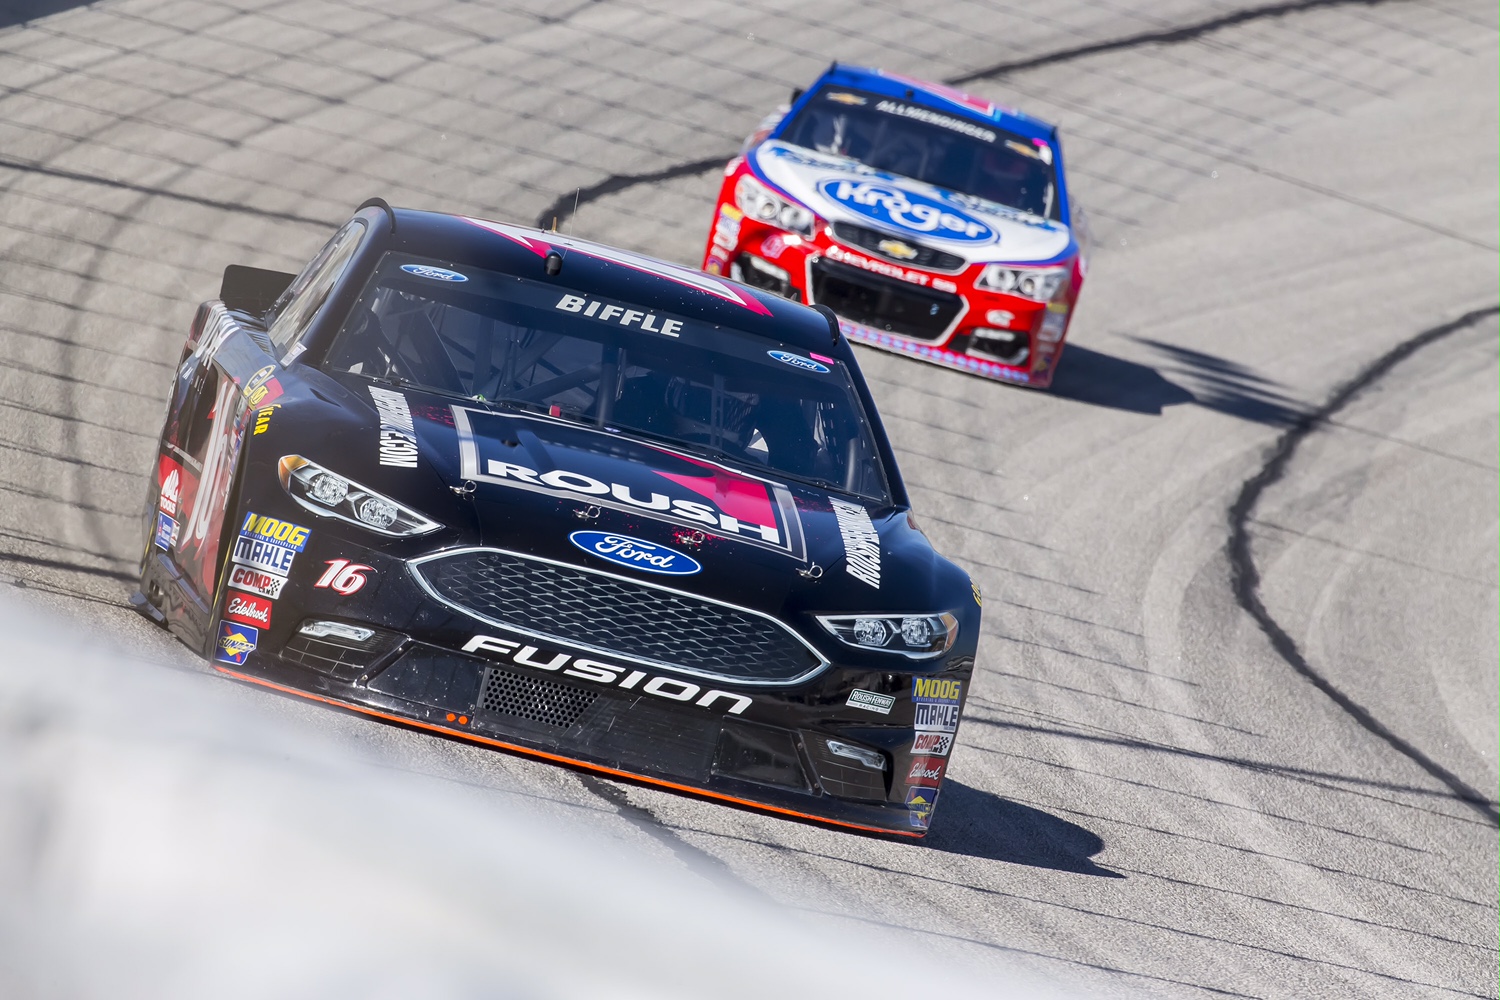 Biffle Drives No. 16 ROUSH Performance Ford to a 12th-Place Finish at Martinsville